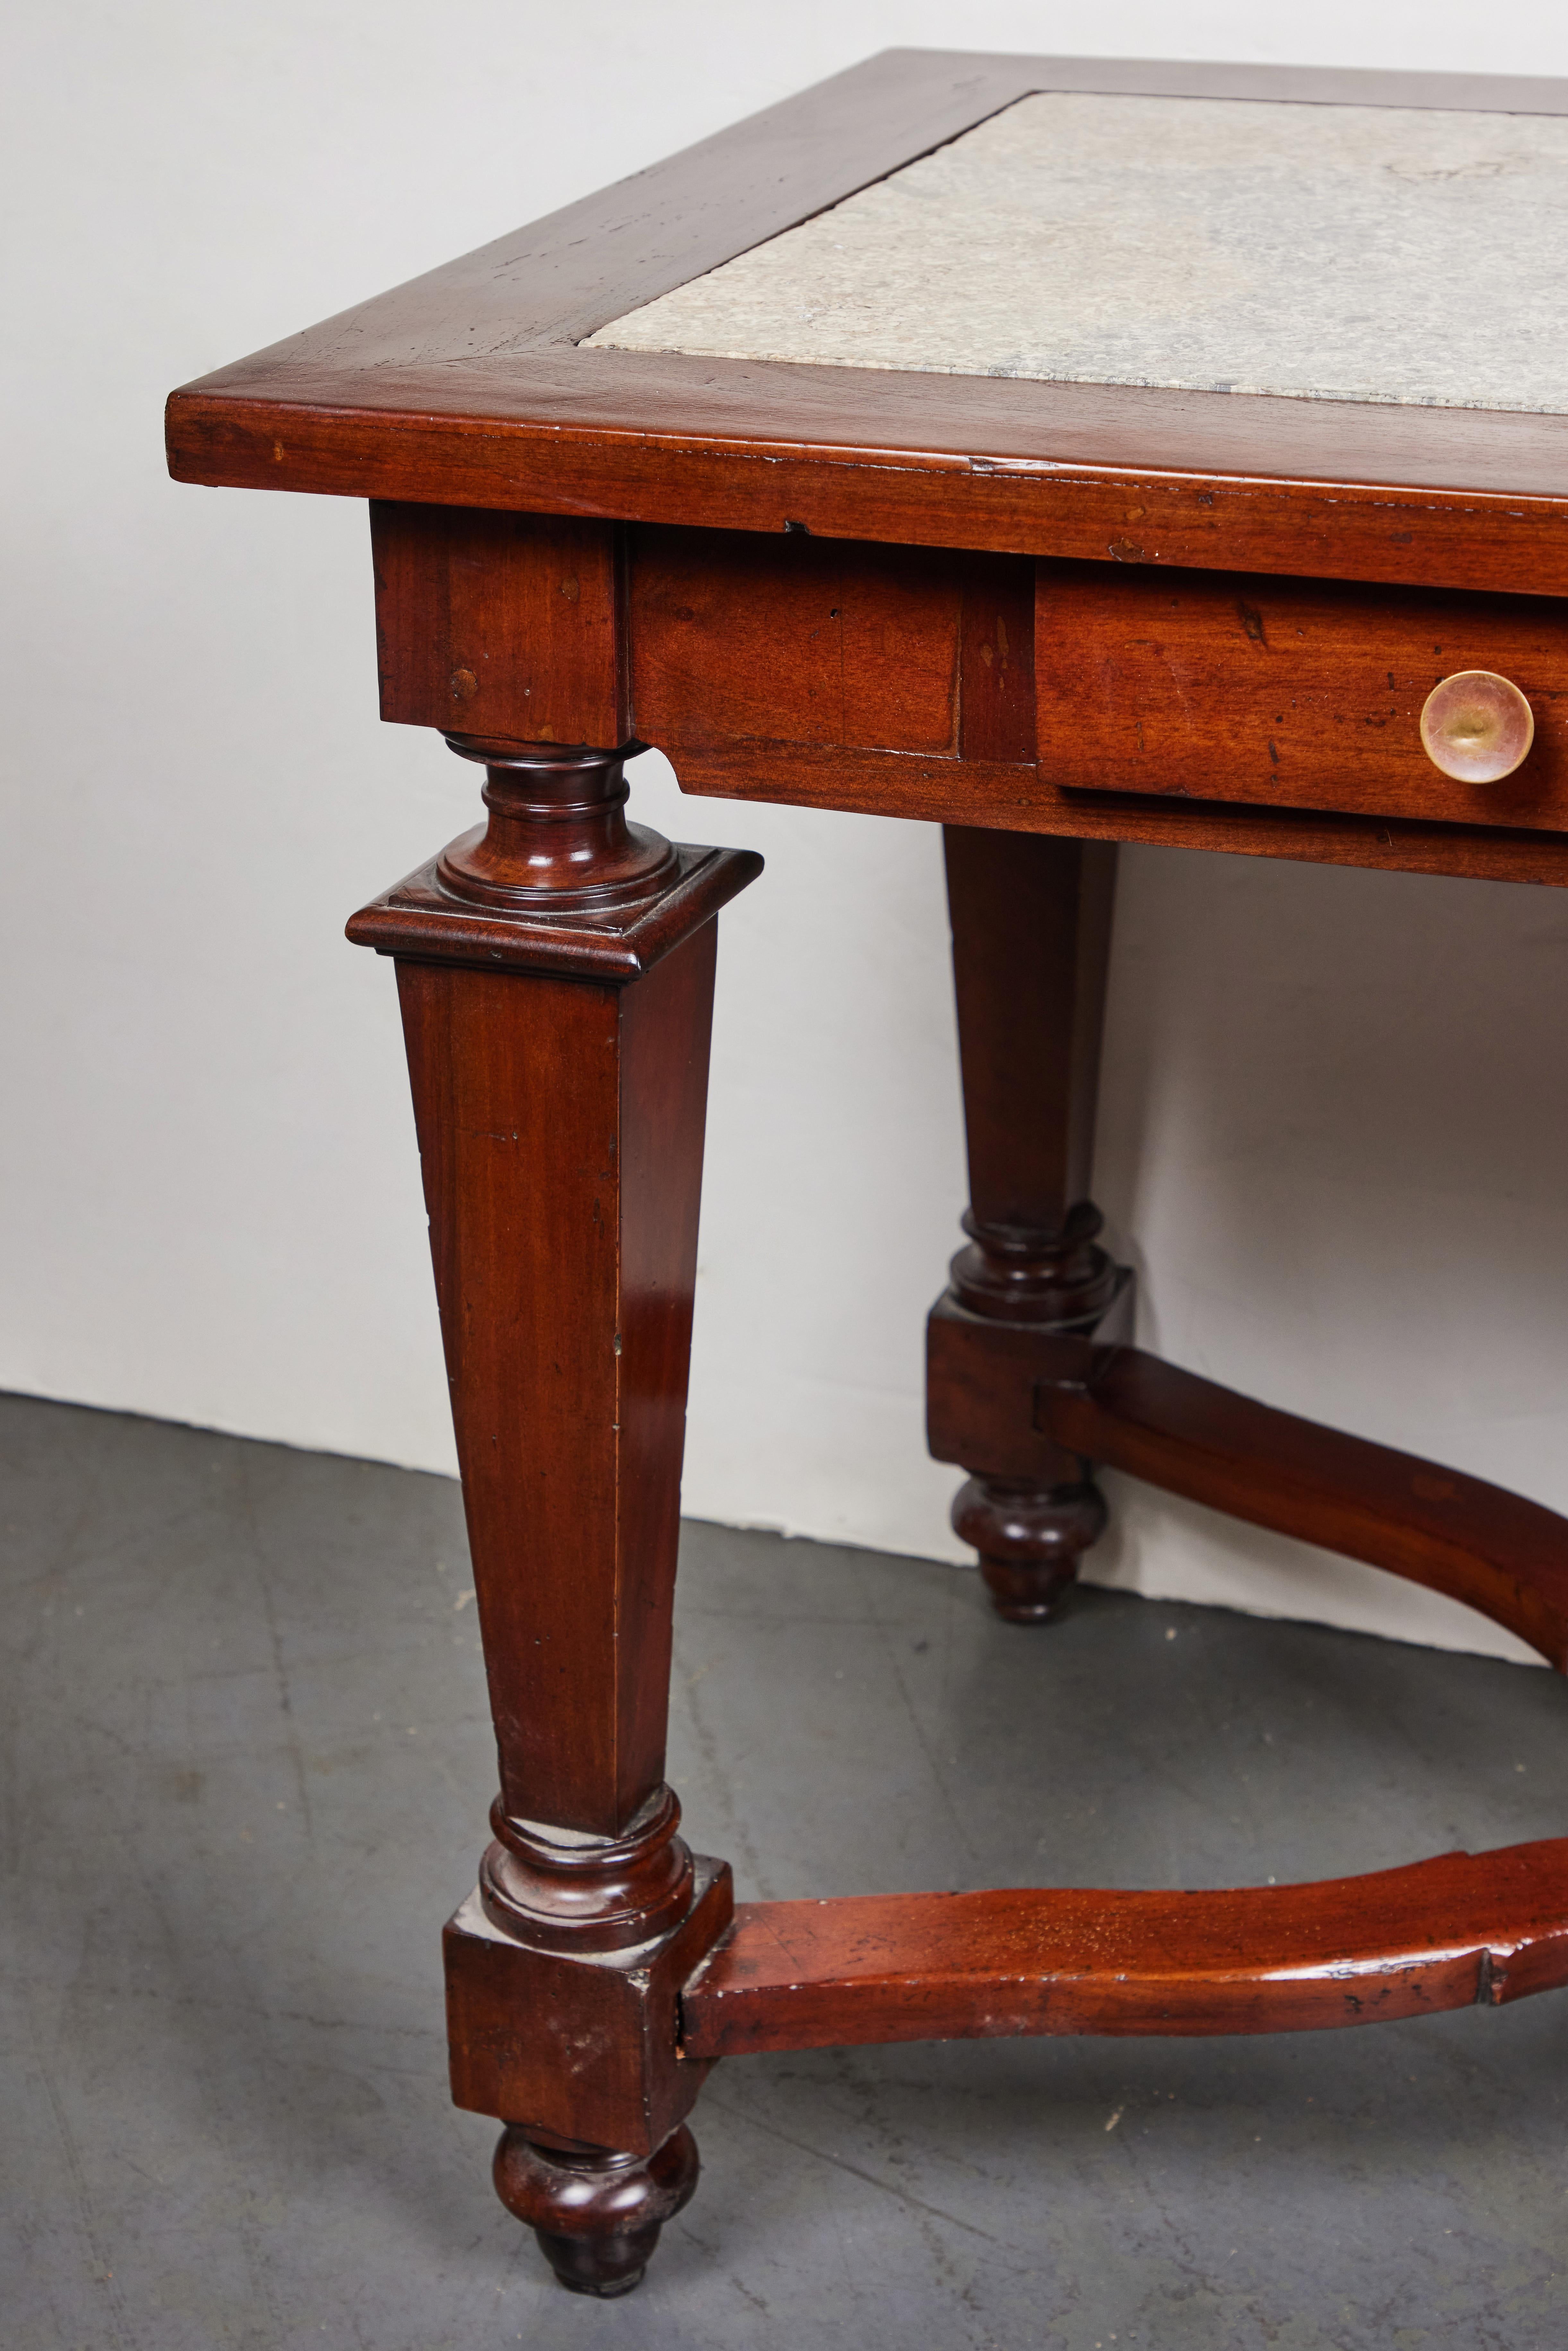 c. 1780 Tuscan Console Table In Good Condition For Sale In Newport Beach, CA